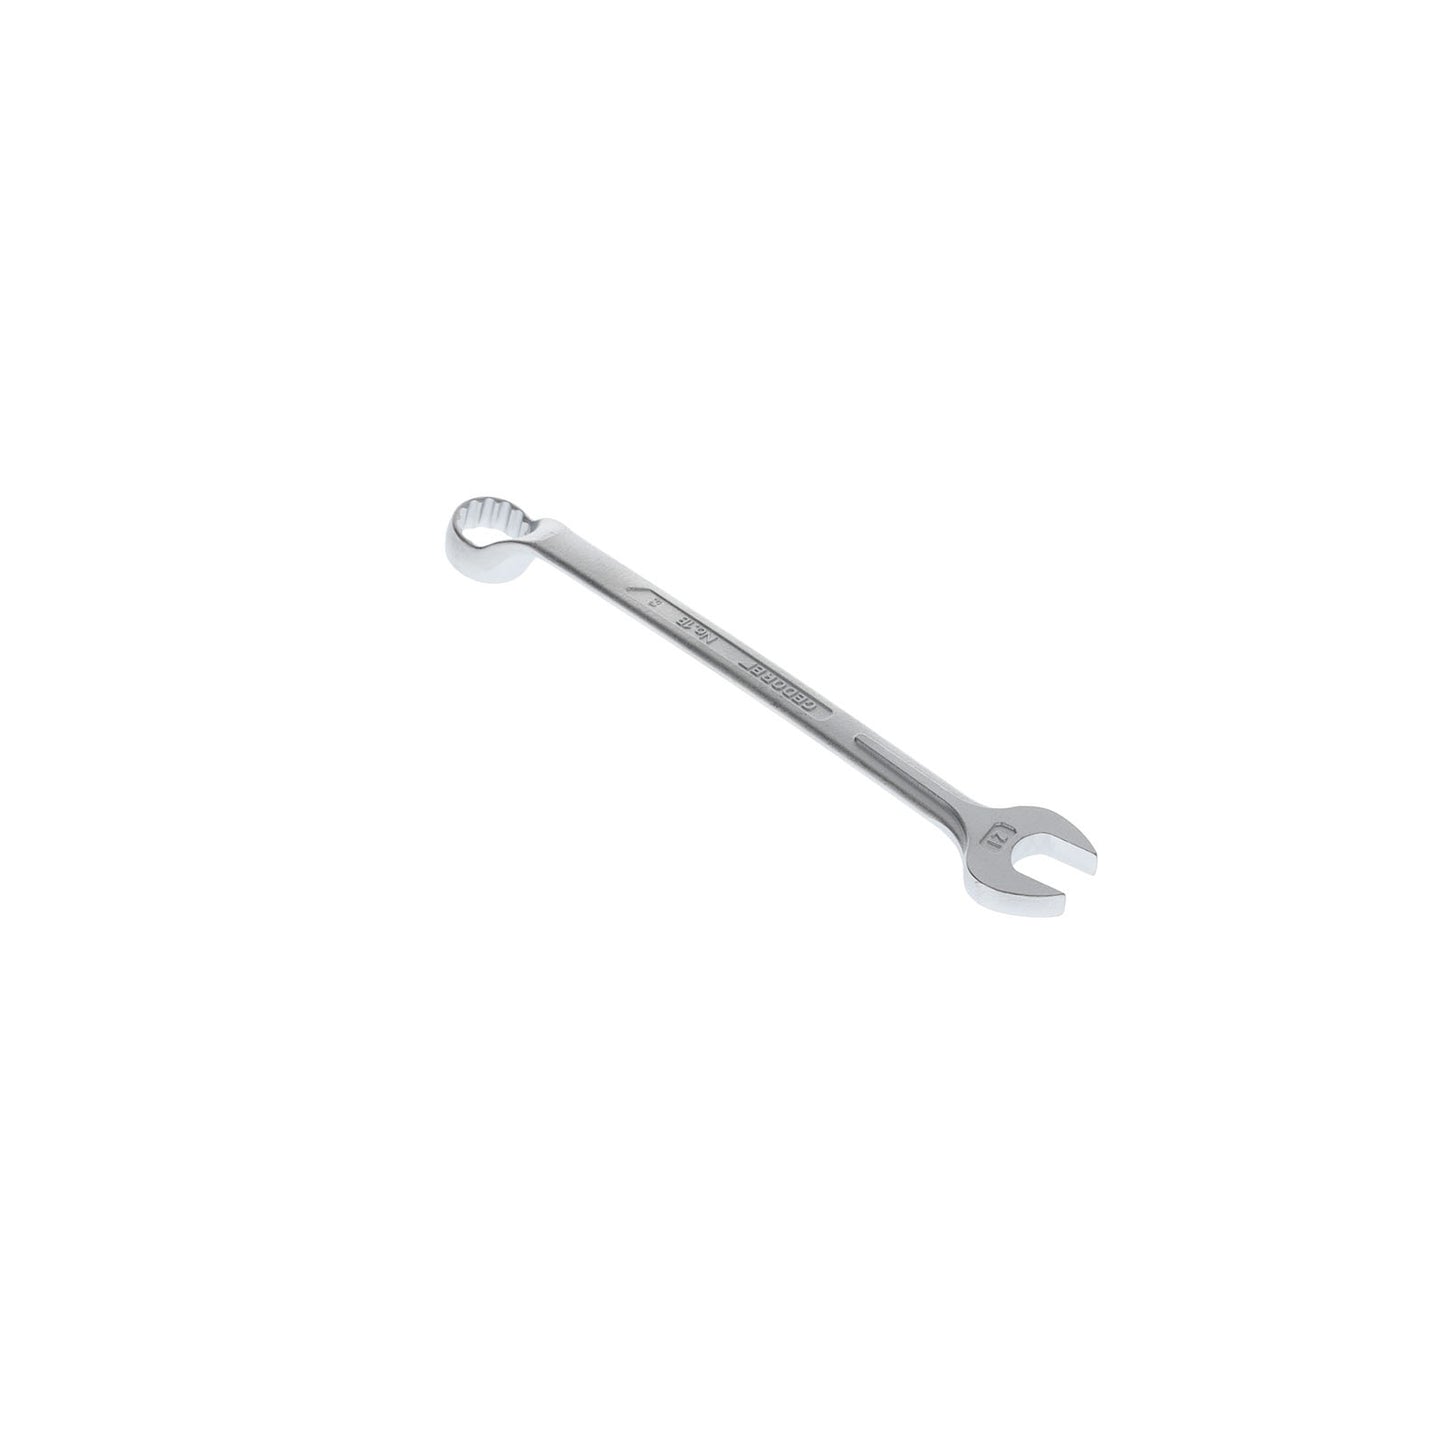 GEDORE 1 B 21 - Offset Combination Wrench, 21mm (6002020)